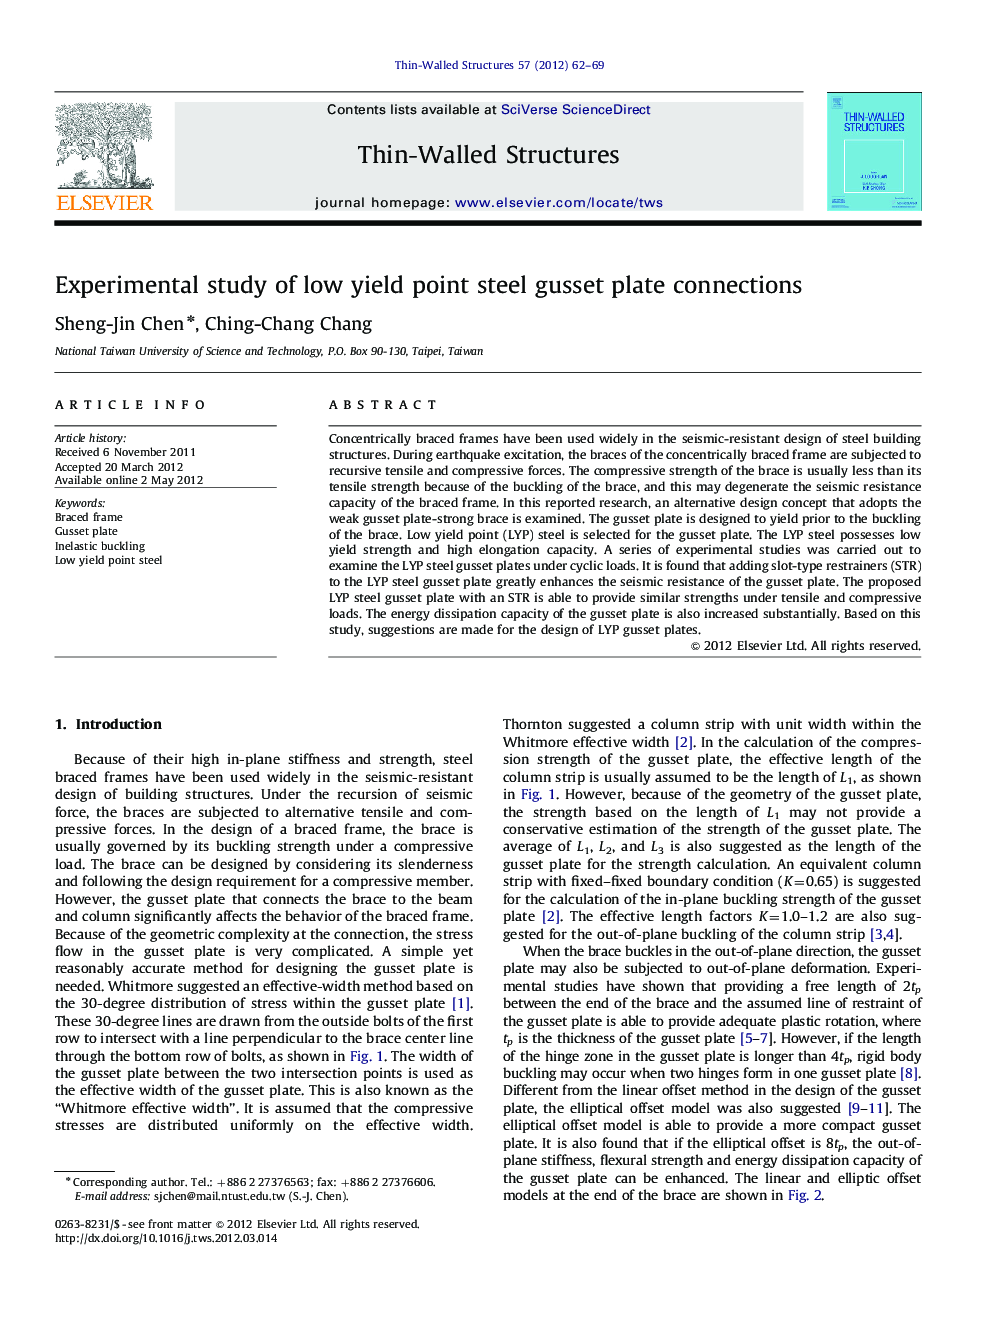 Experimental study of low yield point steel gusset plate connections